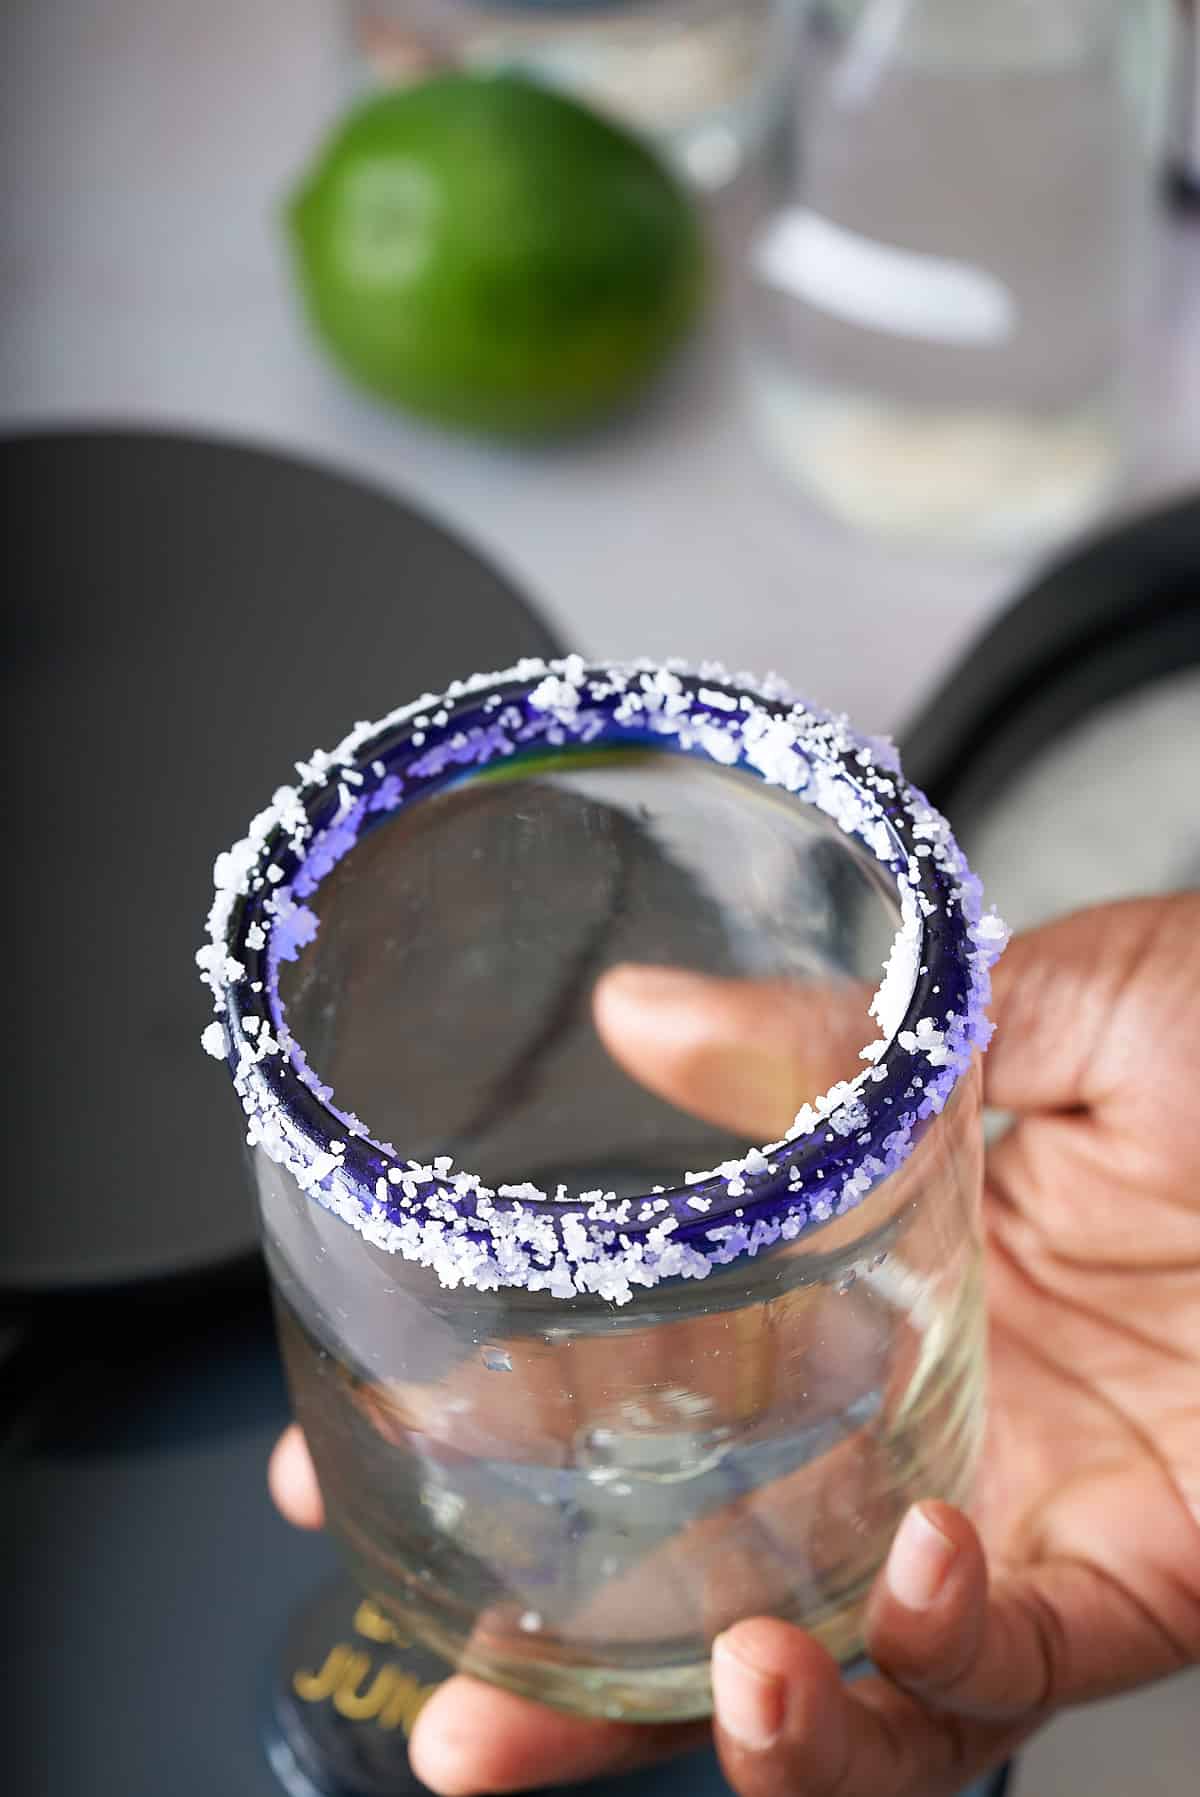 a hand holding a glass with a salt crusted rim